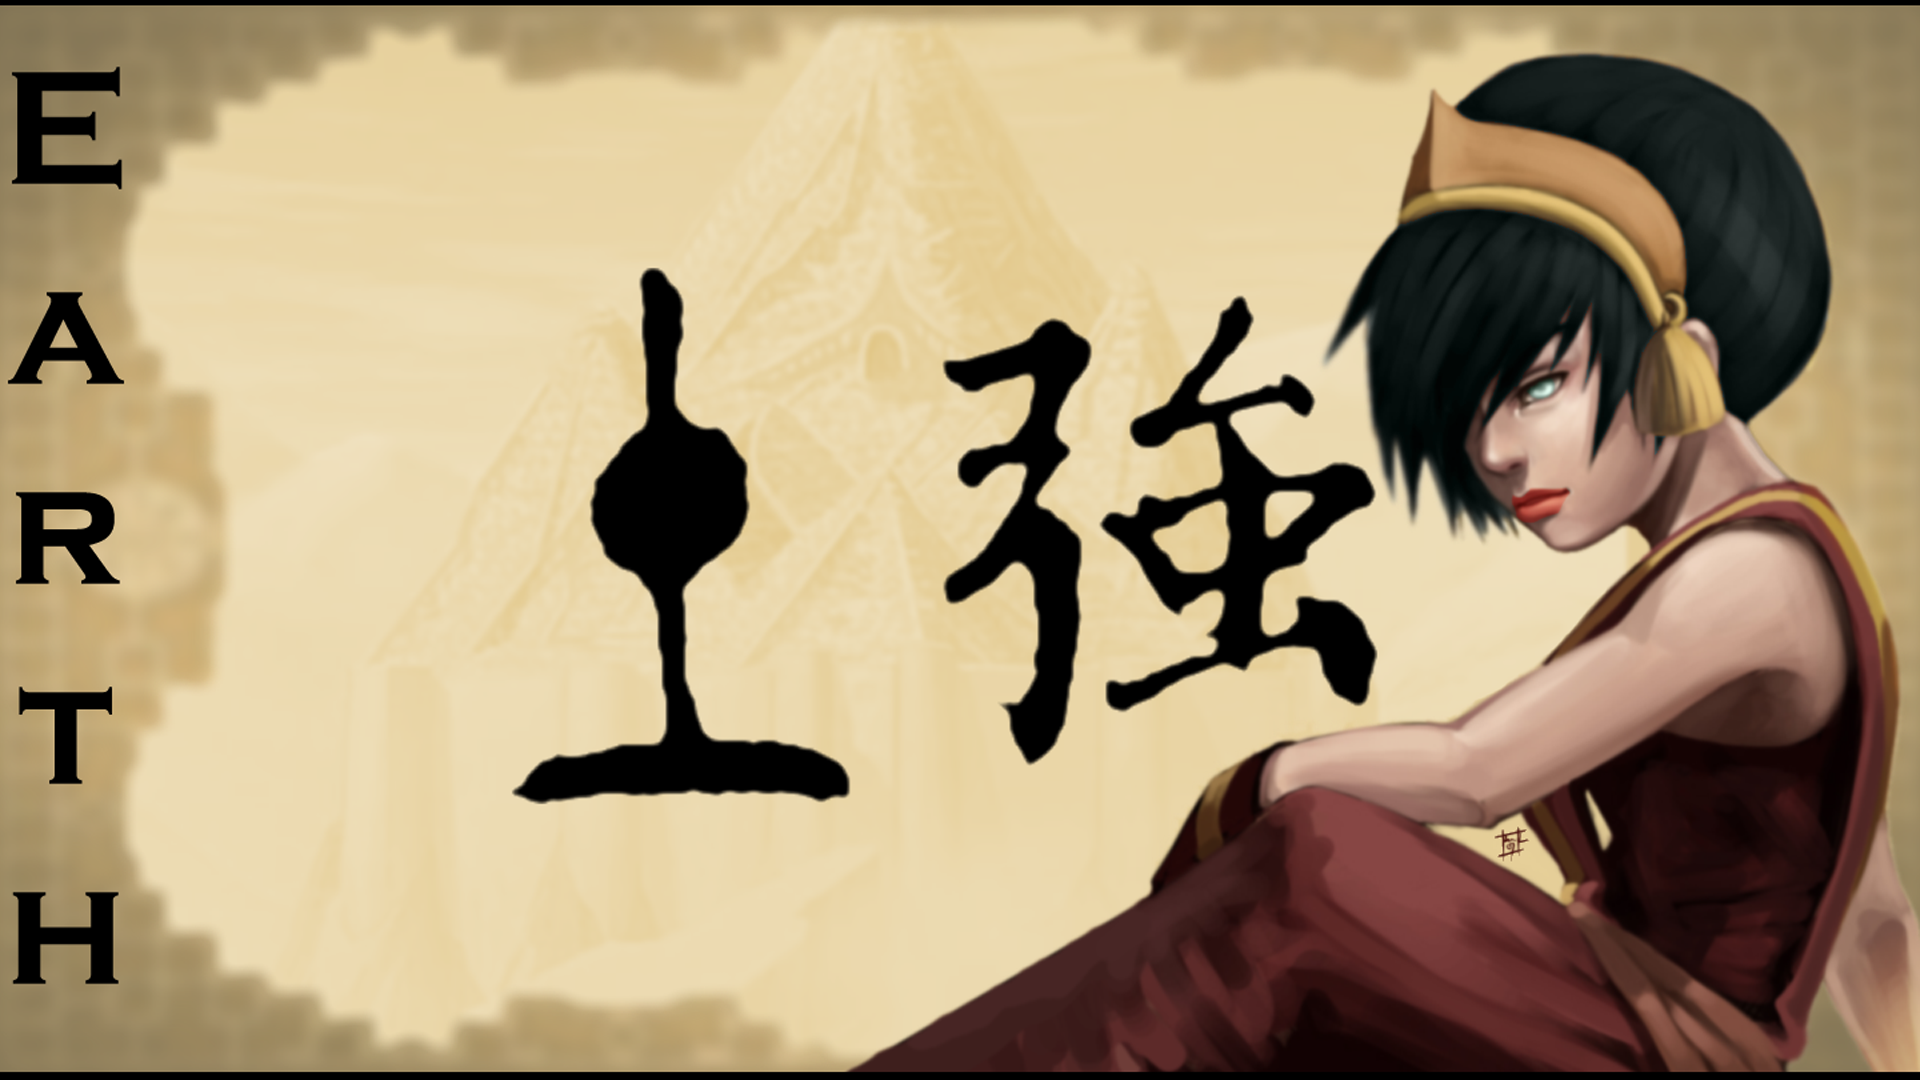 Anime 1920x1080 anime Avatar: The Last Airbender Toph Beifong